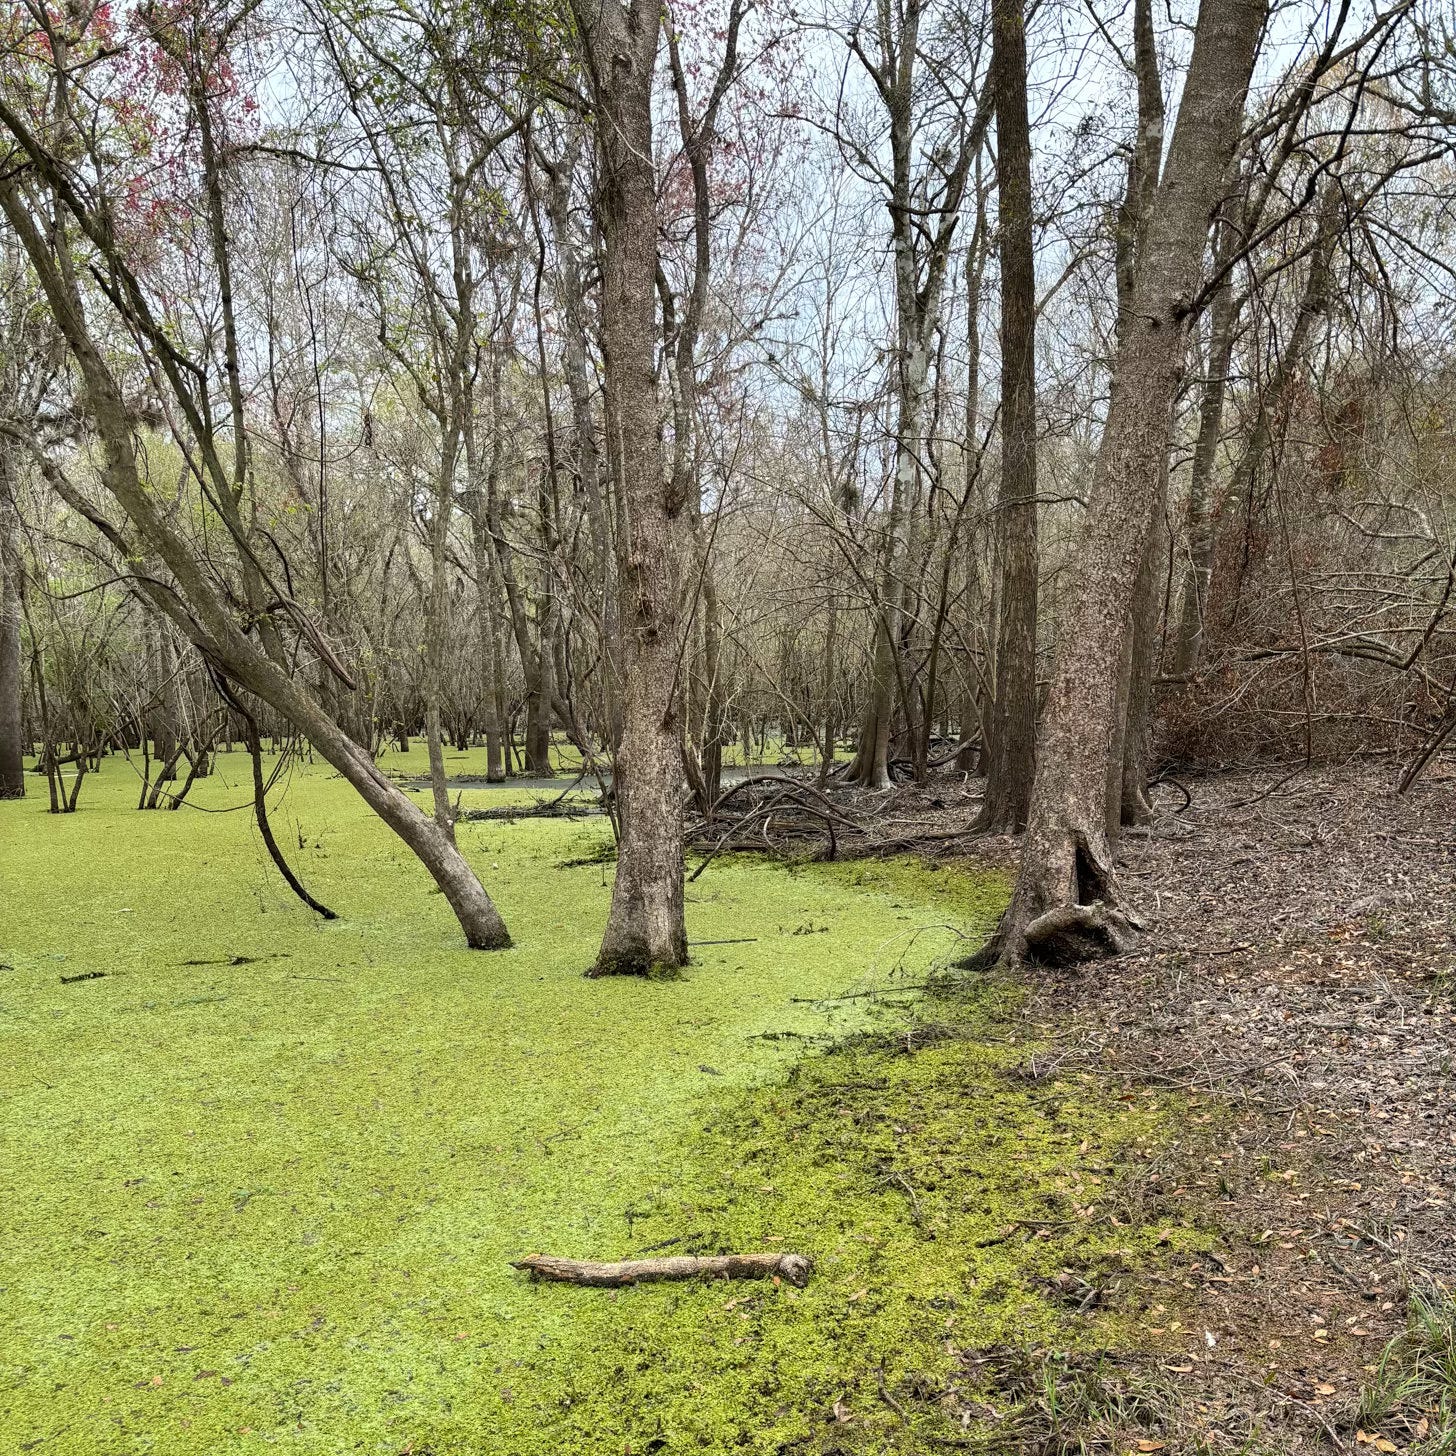 Cypress trees growing in swampy water covered with bright green algae